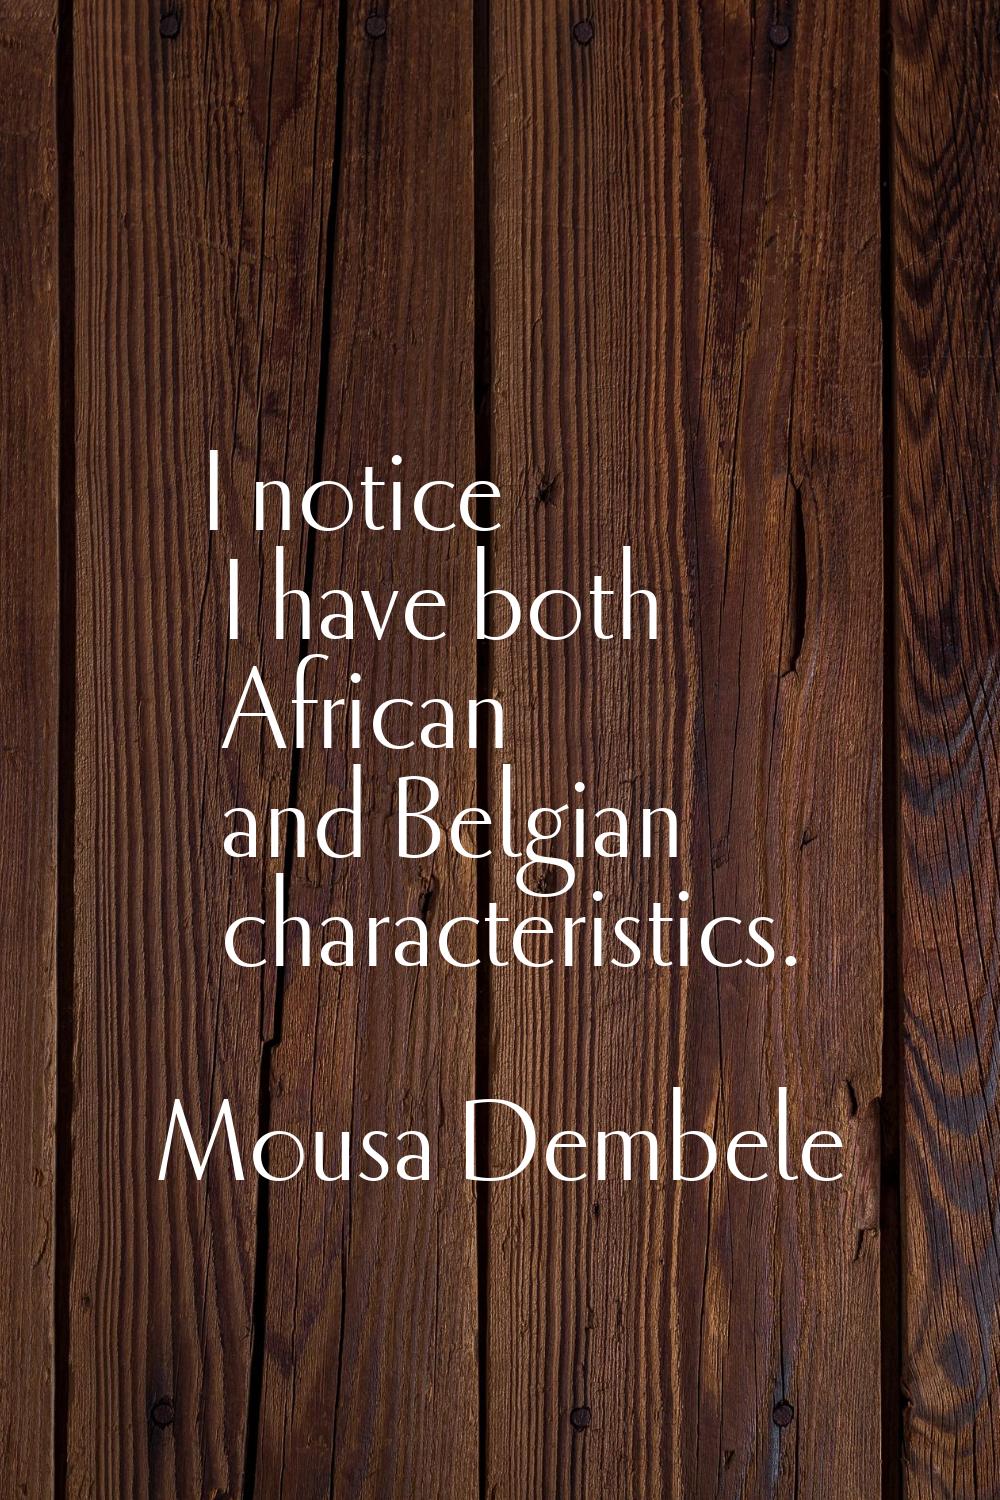 I notice I have both African and Belgian characteristics.